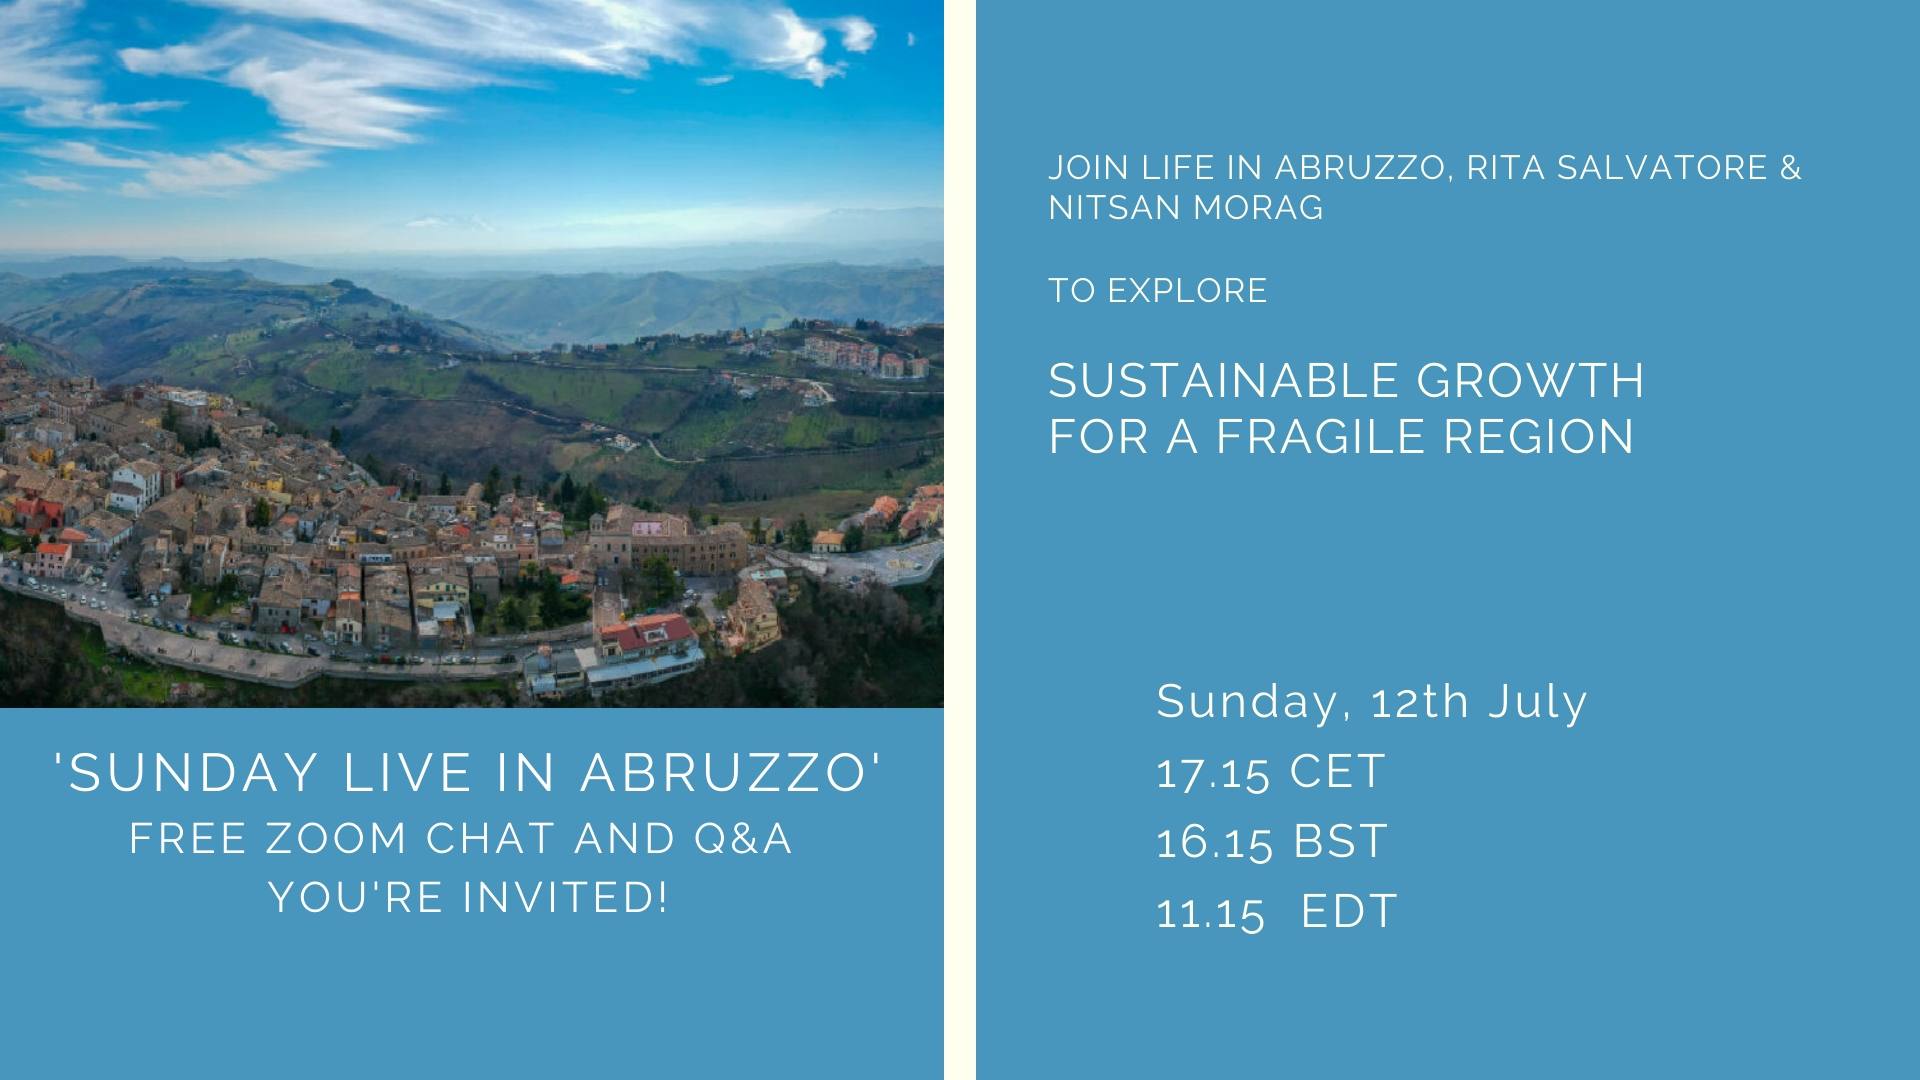 Sunday Live in Abruzzo: Sustainable Growth for a Fragile Region